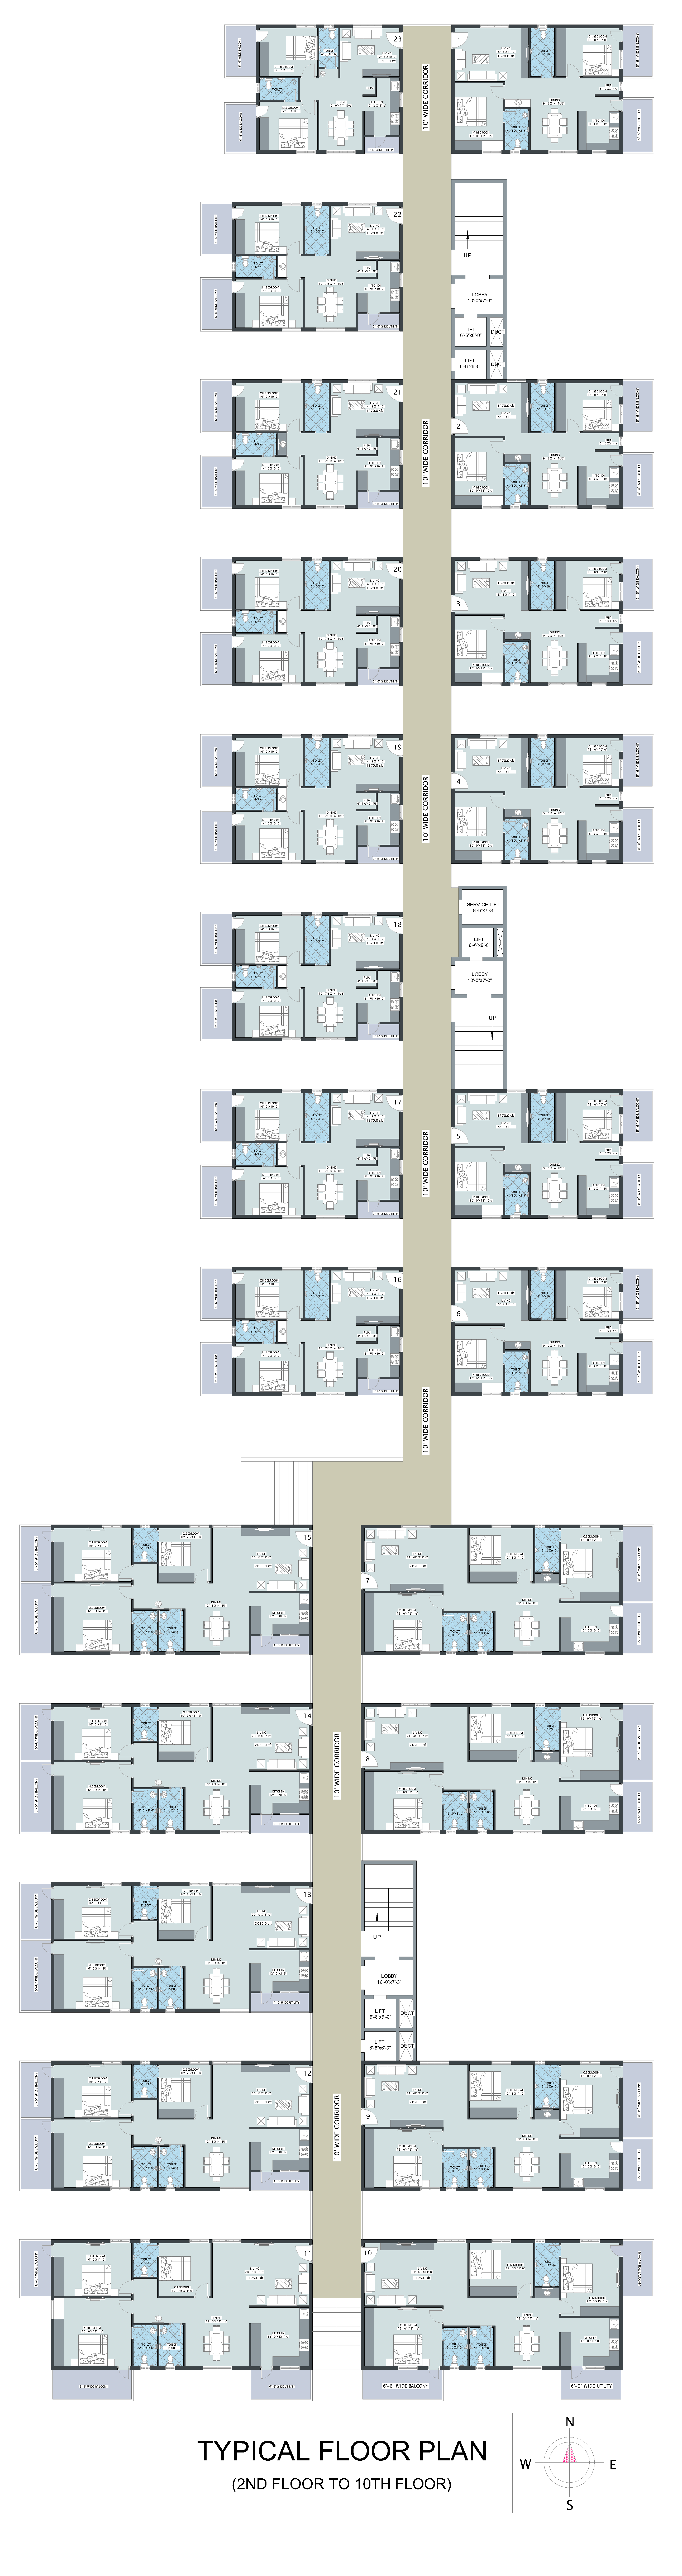 Layout for 2 - 10th floor